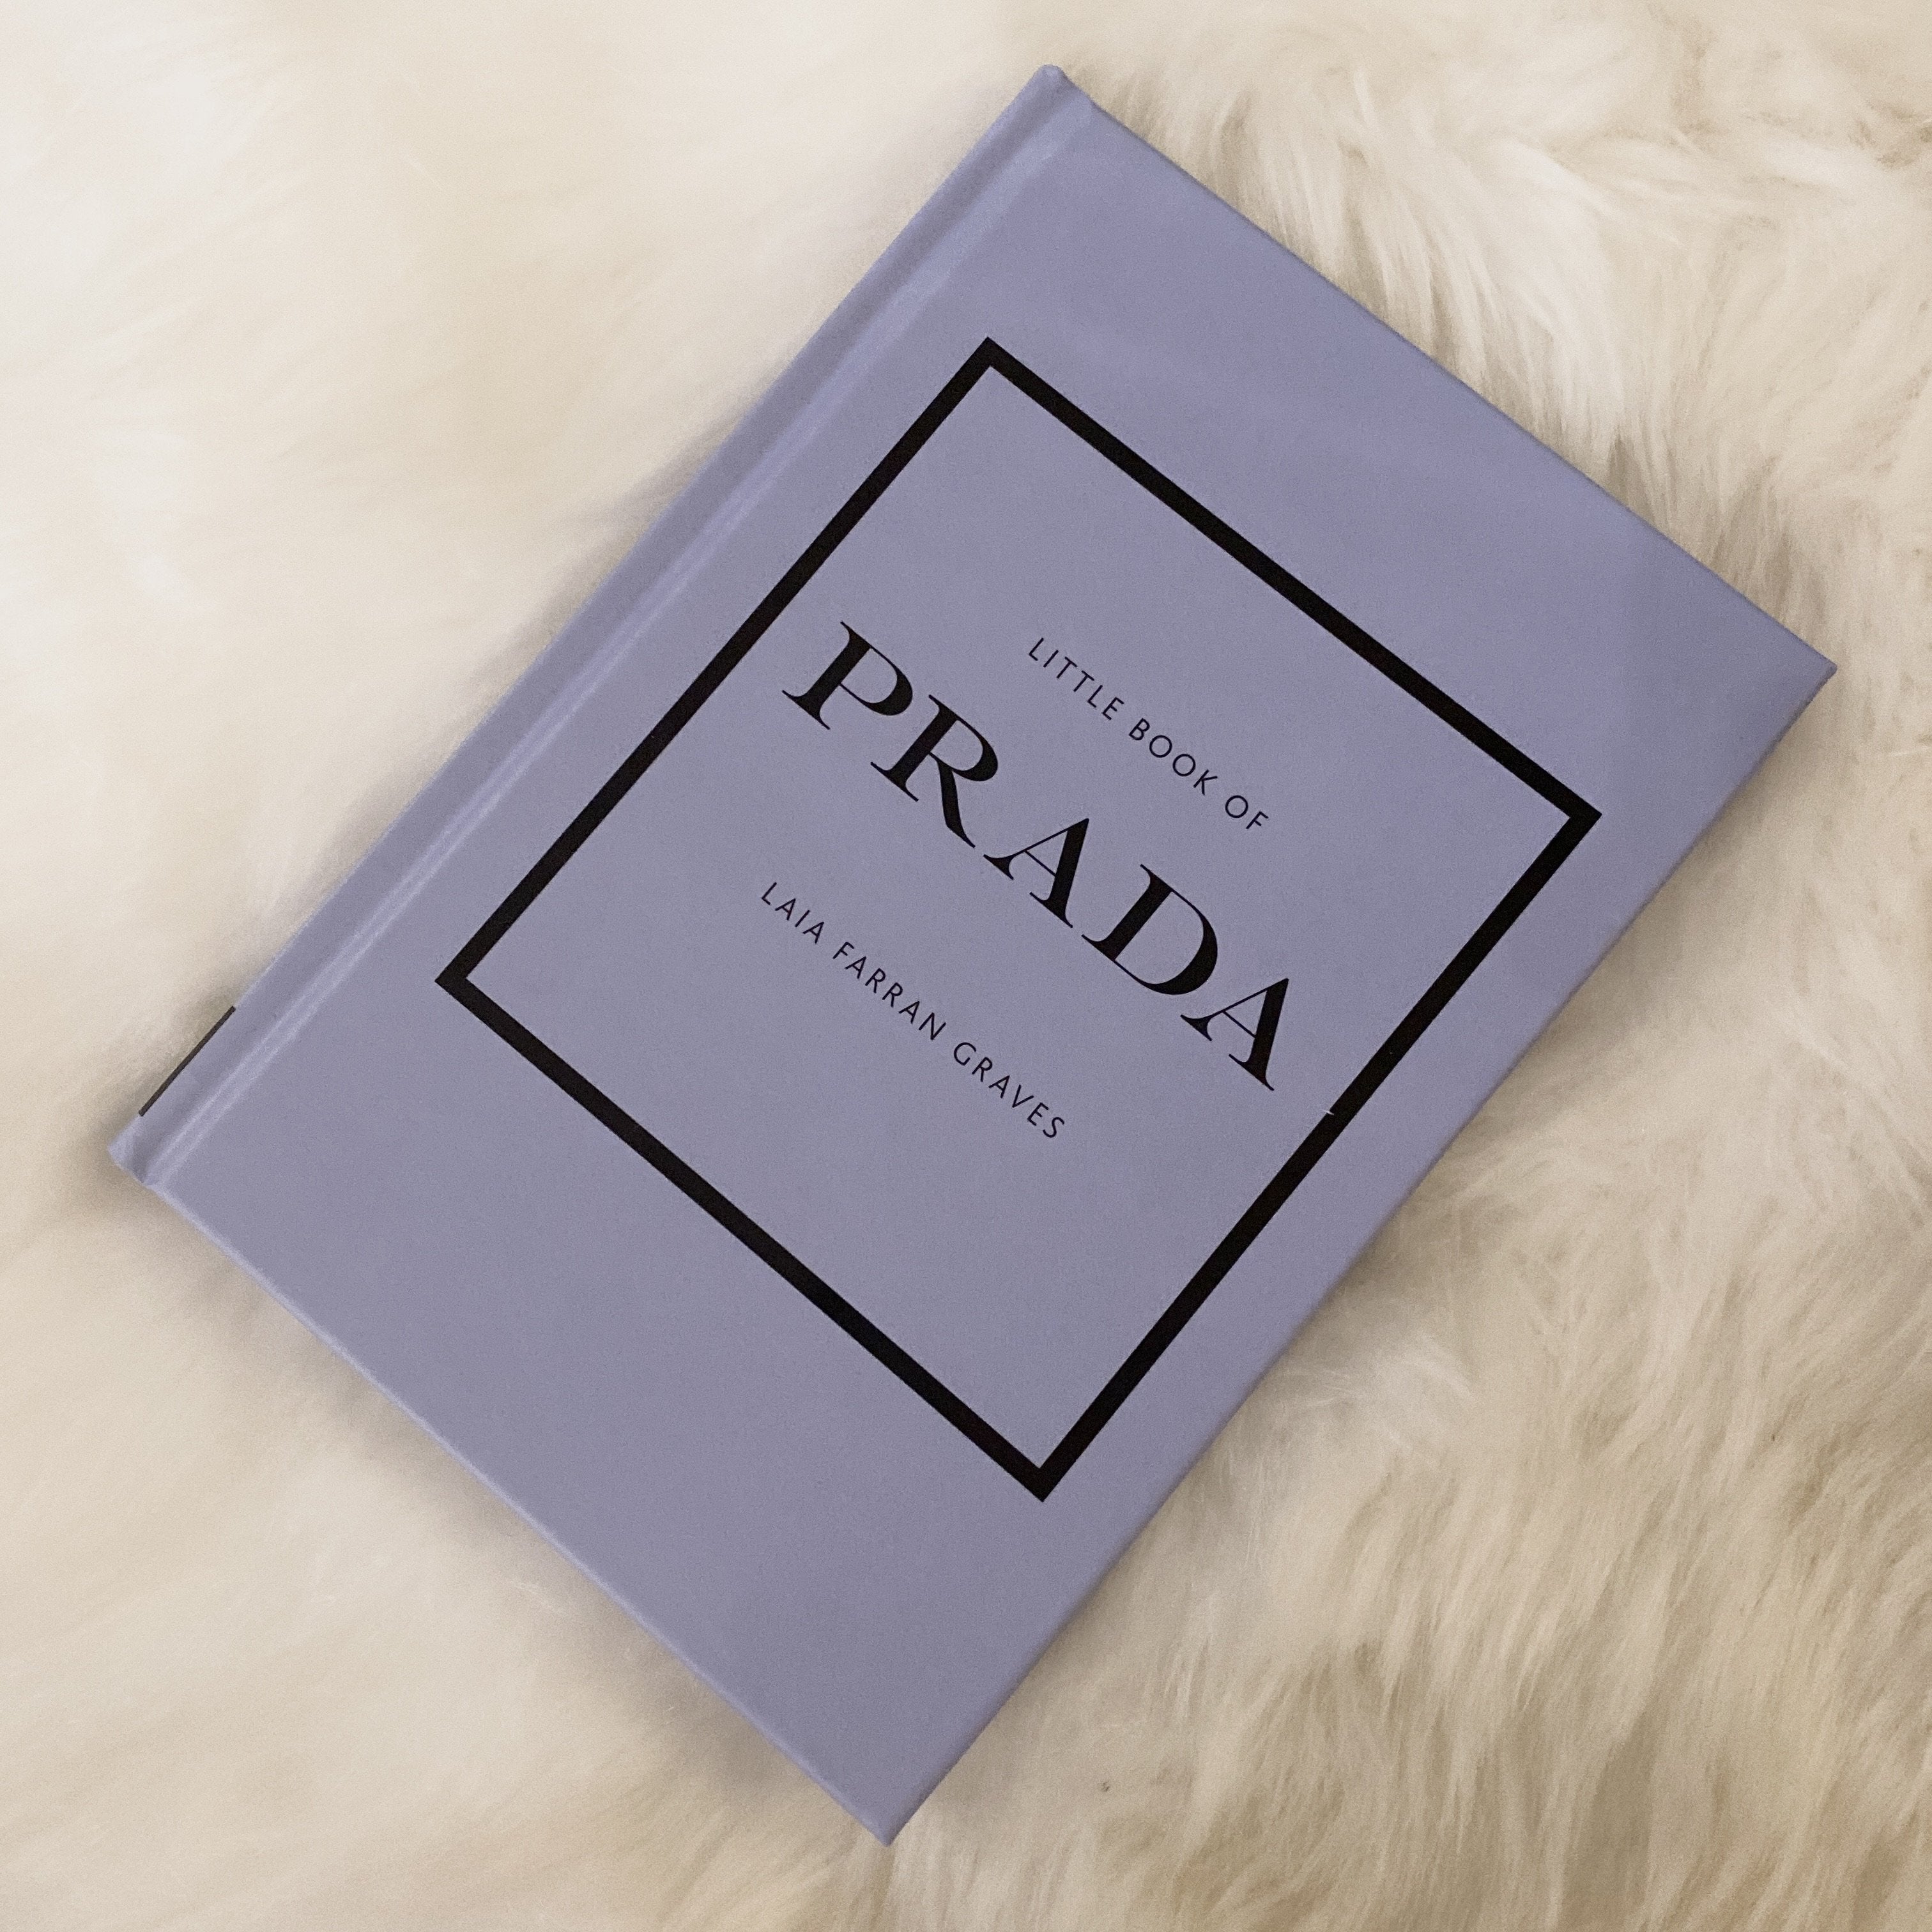 Little Book Of Prada: The Story Of The Iconic Fashion House By Laia Farran  Graves